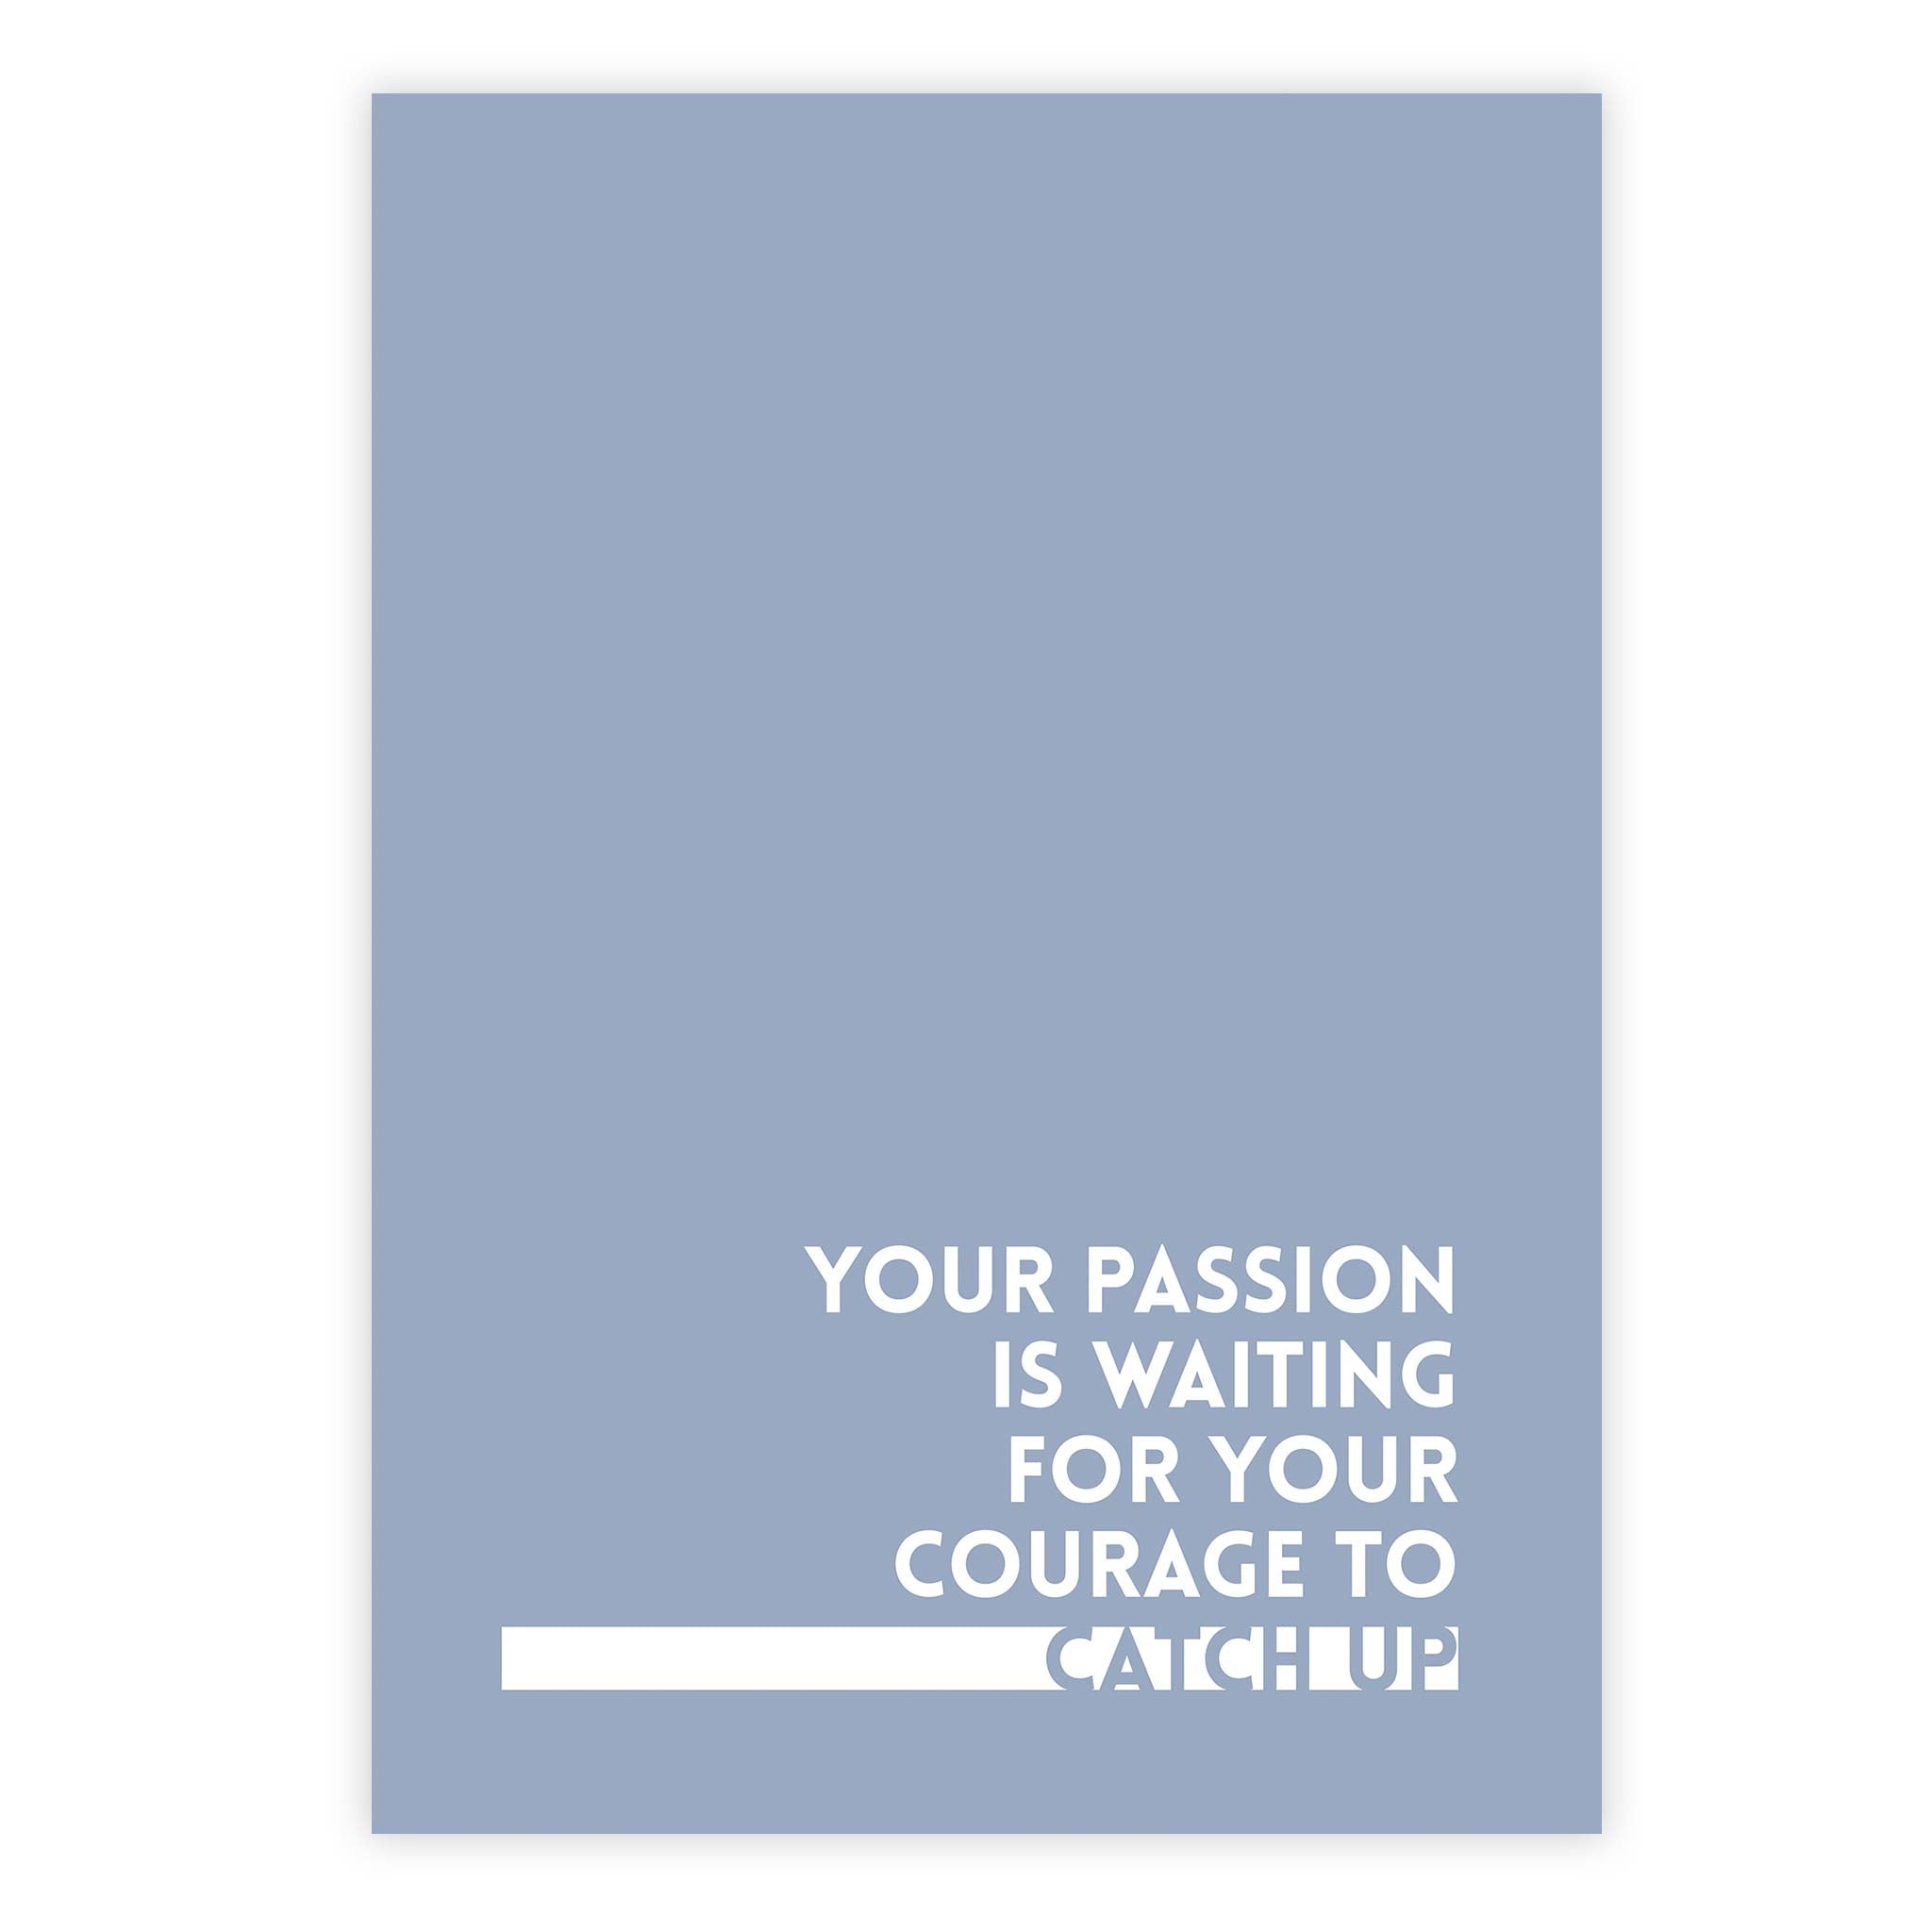 Your passion is waiting for your courage to catch up